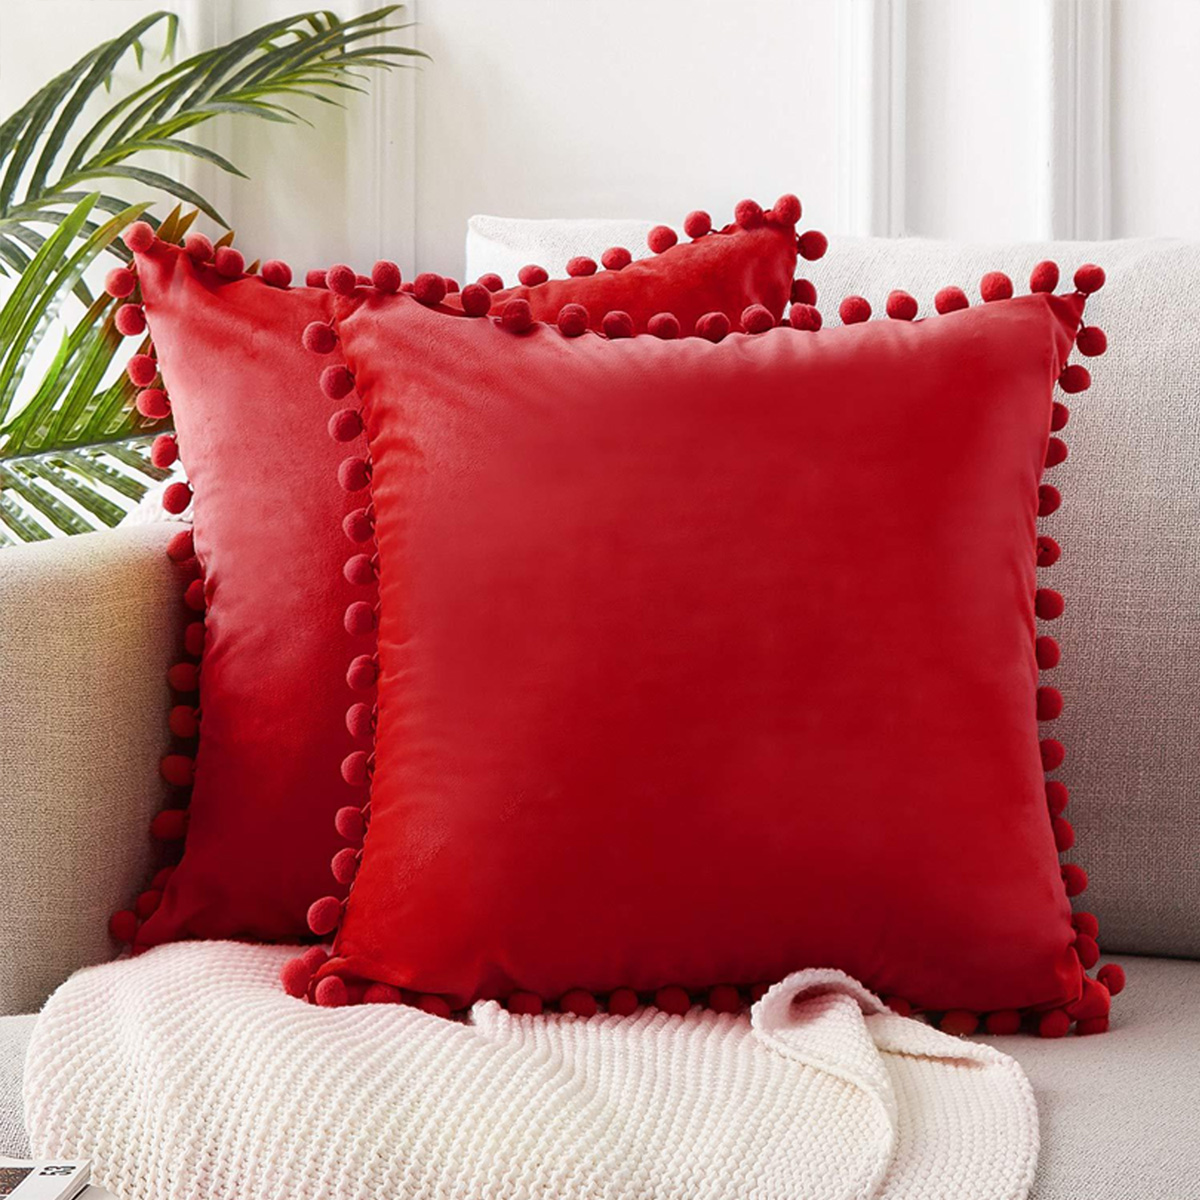 4545cm-Soft-Velvet-Pillow-Covers-Cute-Pom-Poms-Throw-Pillow-Covers-Square-Cushion-Case-for-Sofa-Couc-1779027-7